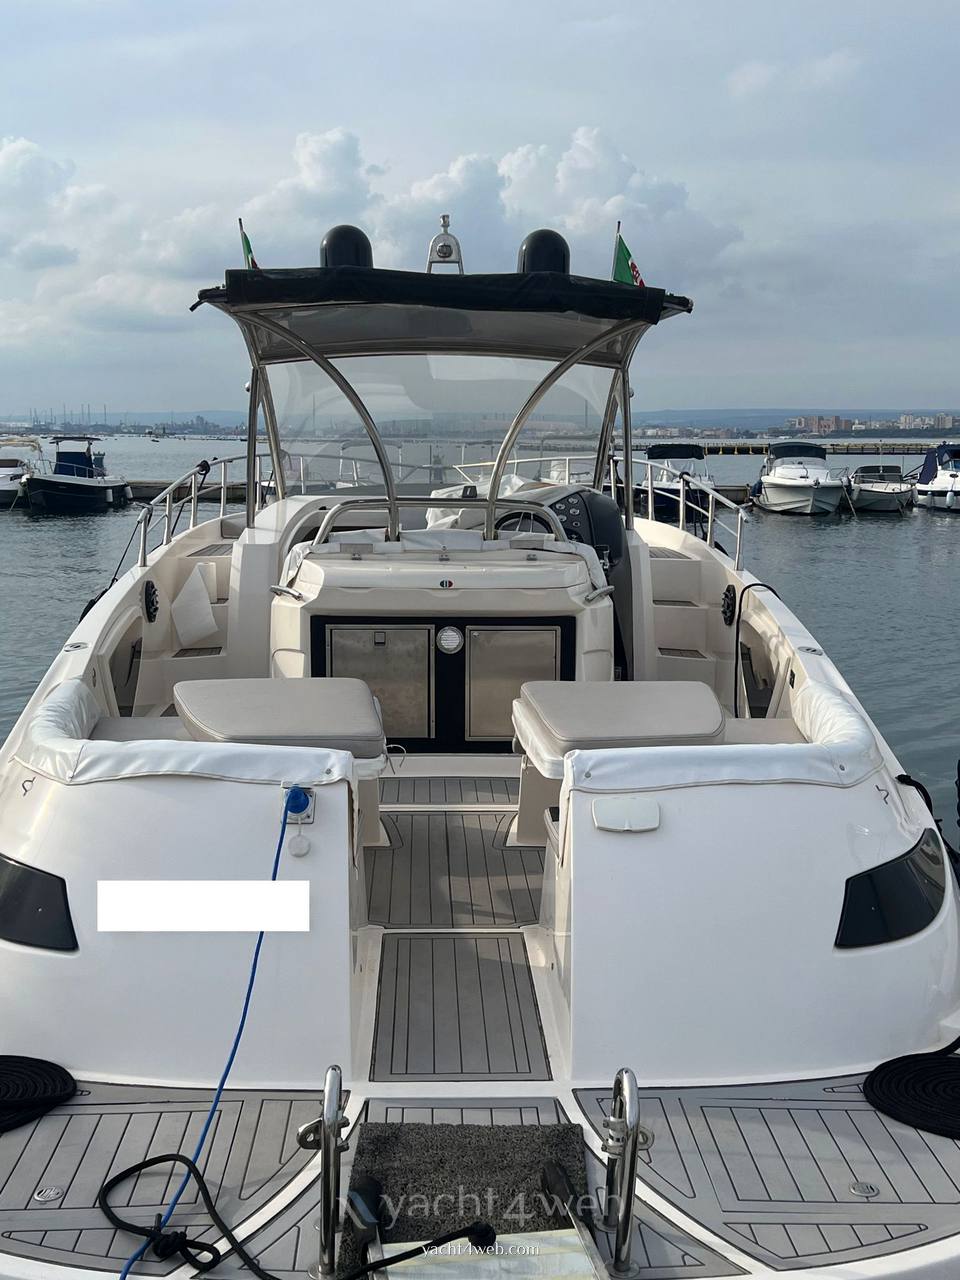 Manò marine 37 gs gran sport Motor boat used for sale